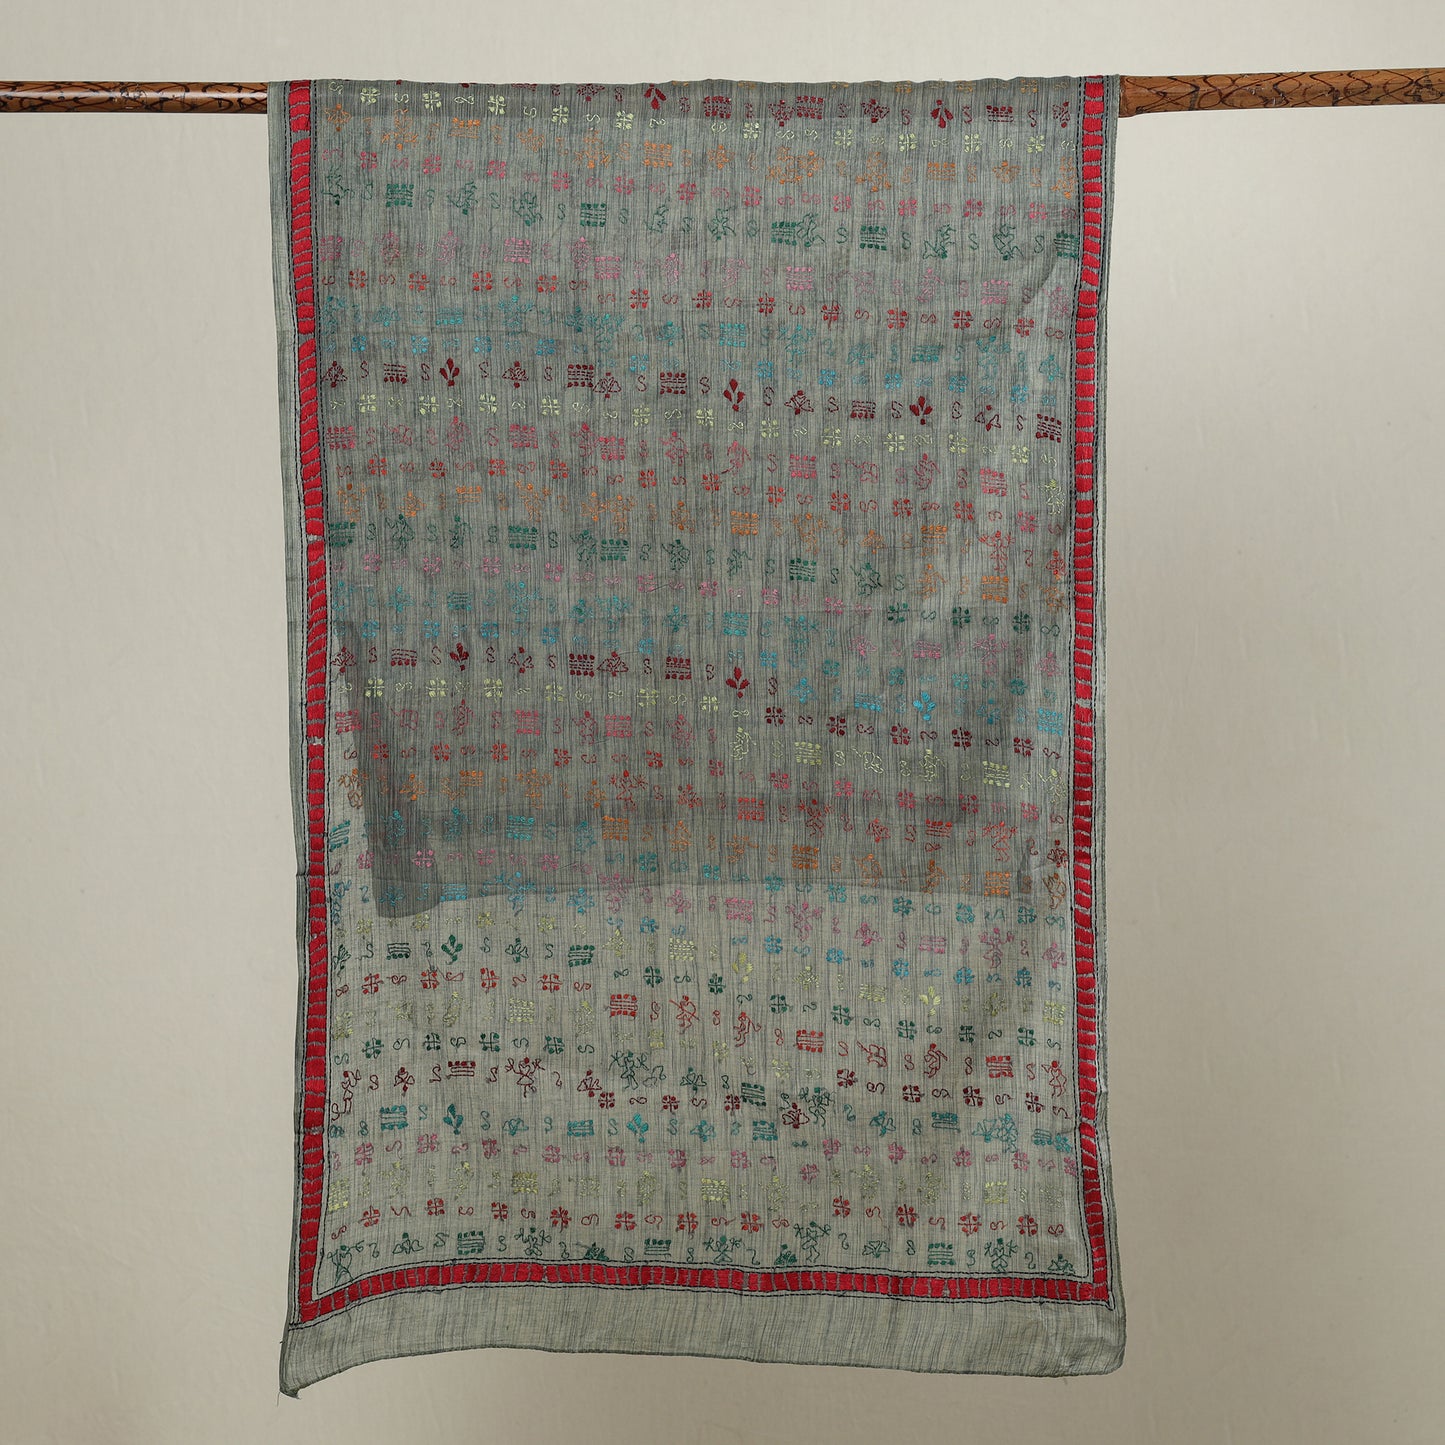 Grey - Bengal Kantha Hand Embroidery Cotton Stole 12